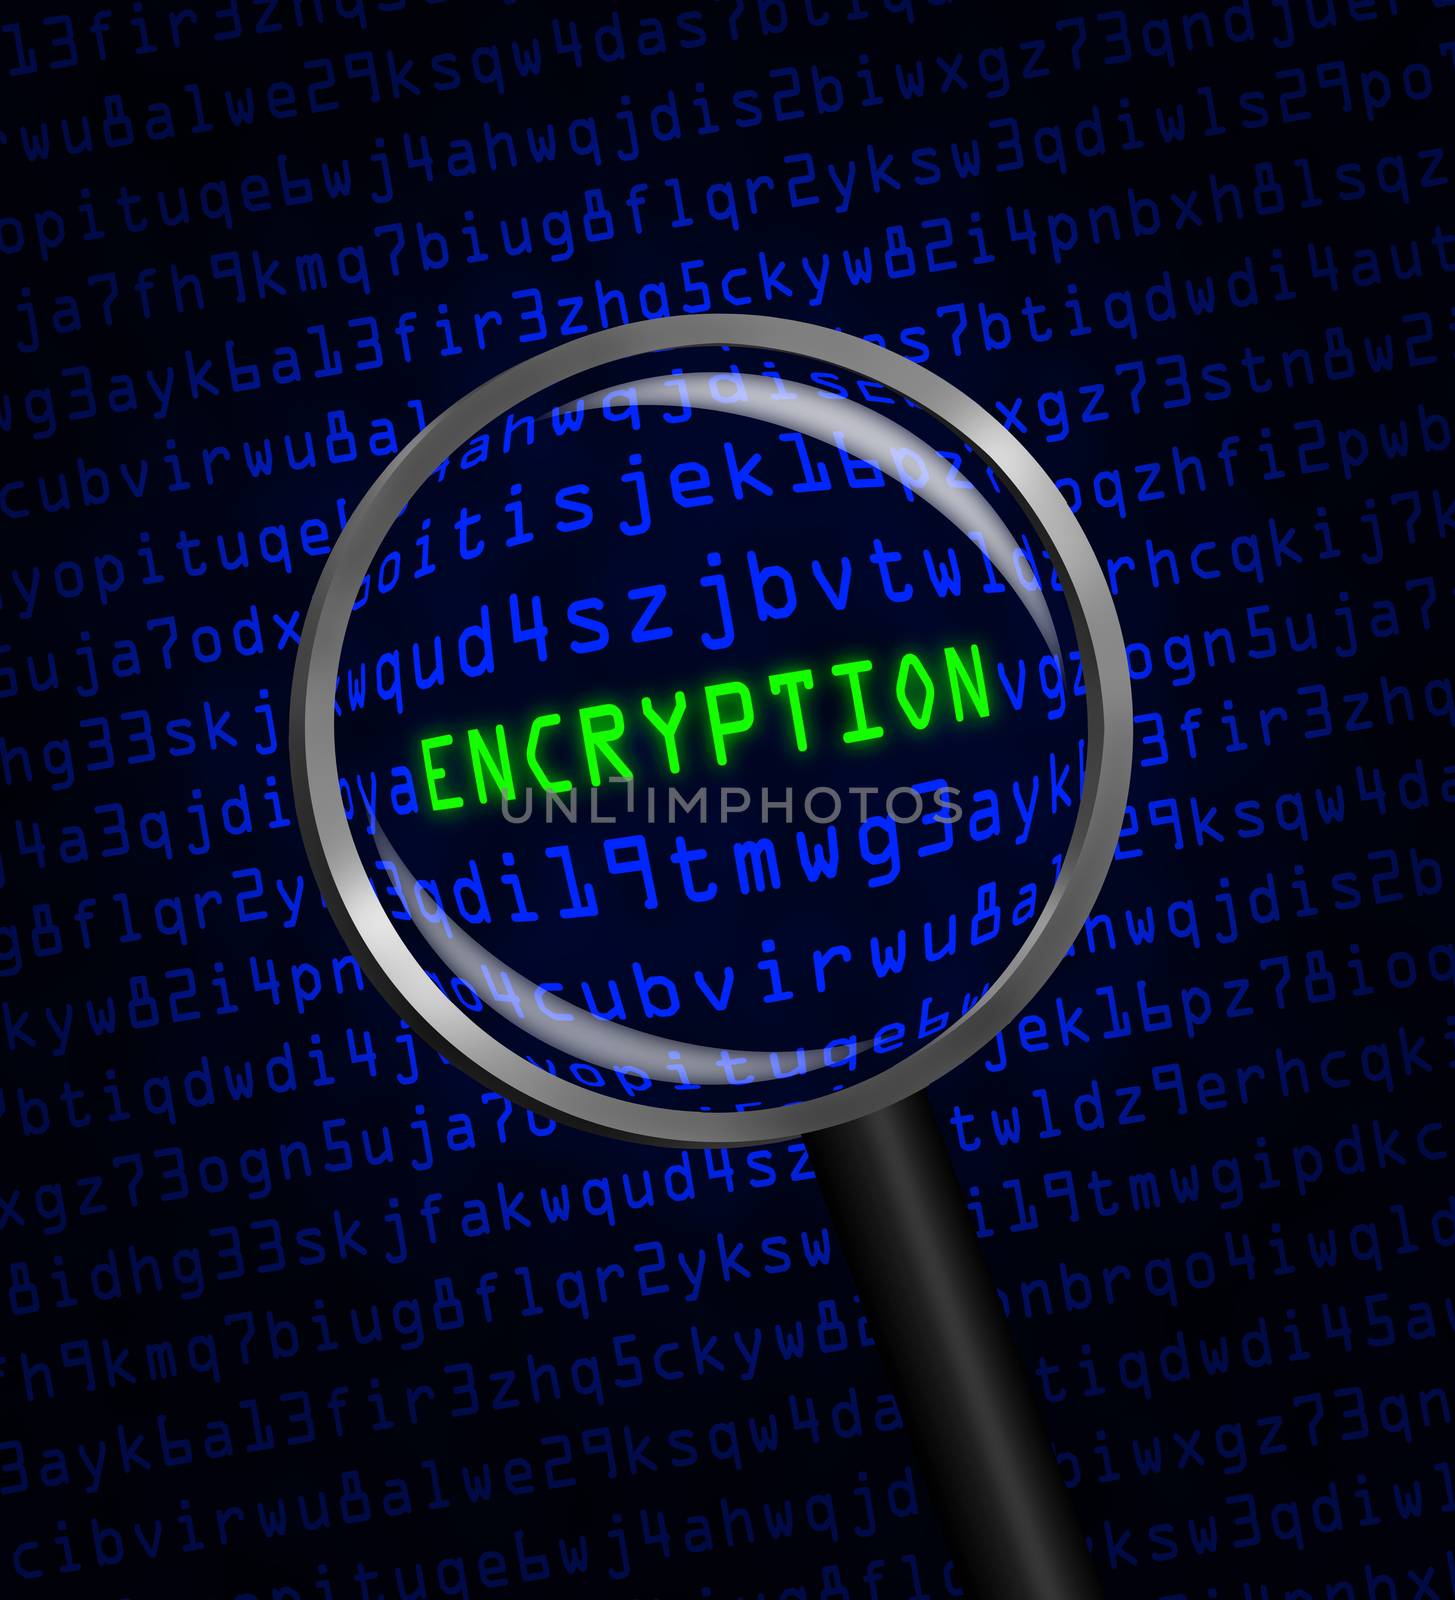 The word "ENCRYPTION" in green revealed in blue computer machine code through a magnifying glass.